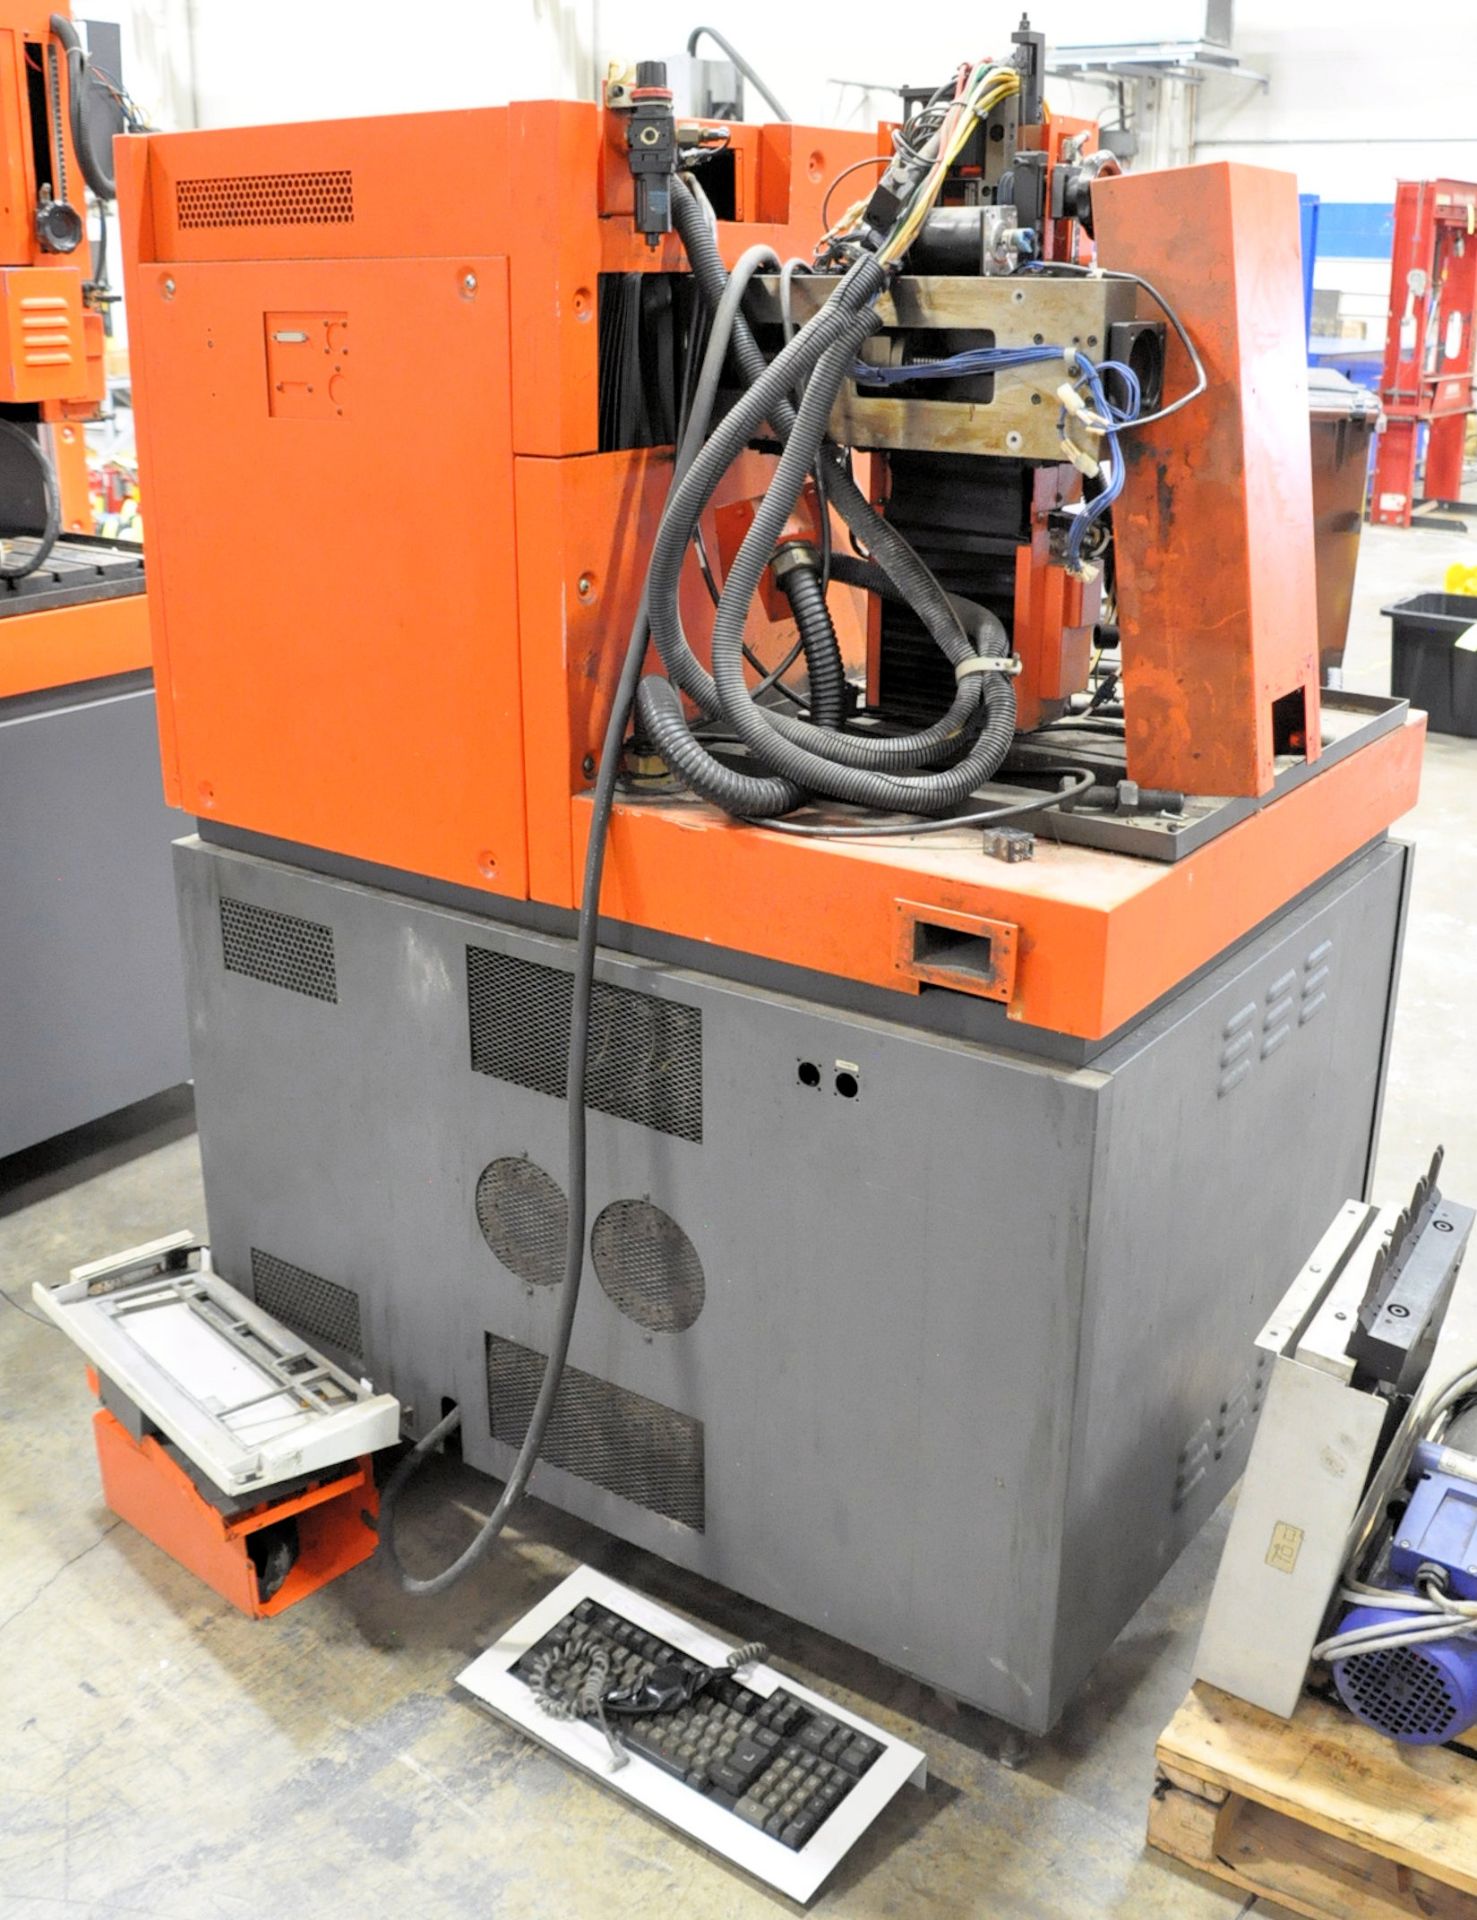 Charmilles SH2-CNC EDM Drill, S/n 91102014, New 1991, (Condition Unknown), (Not in Service) - Image 4 of 4